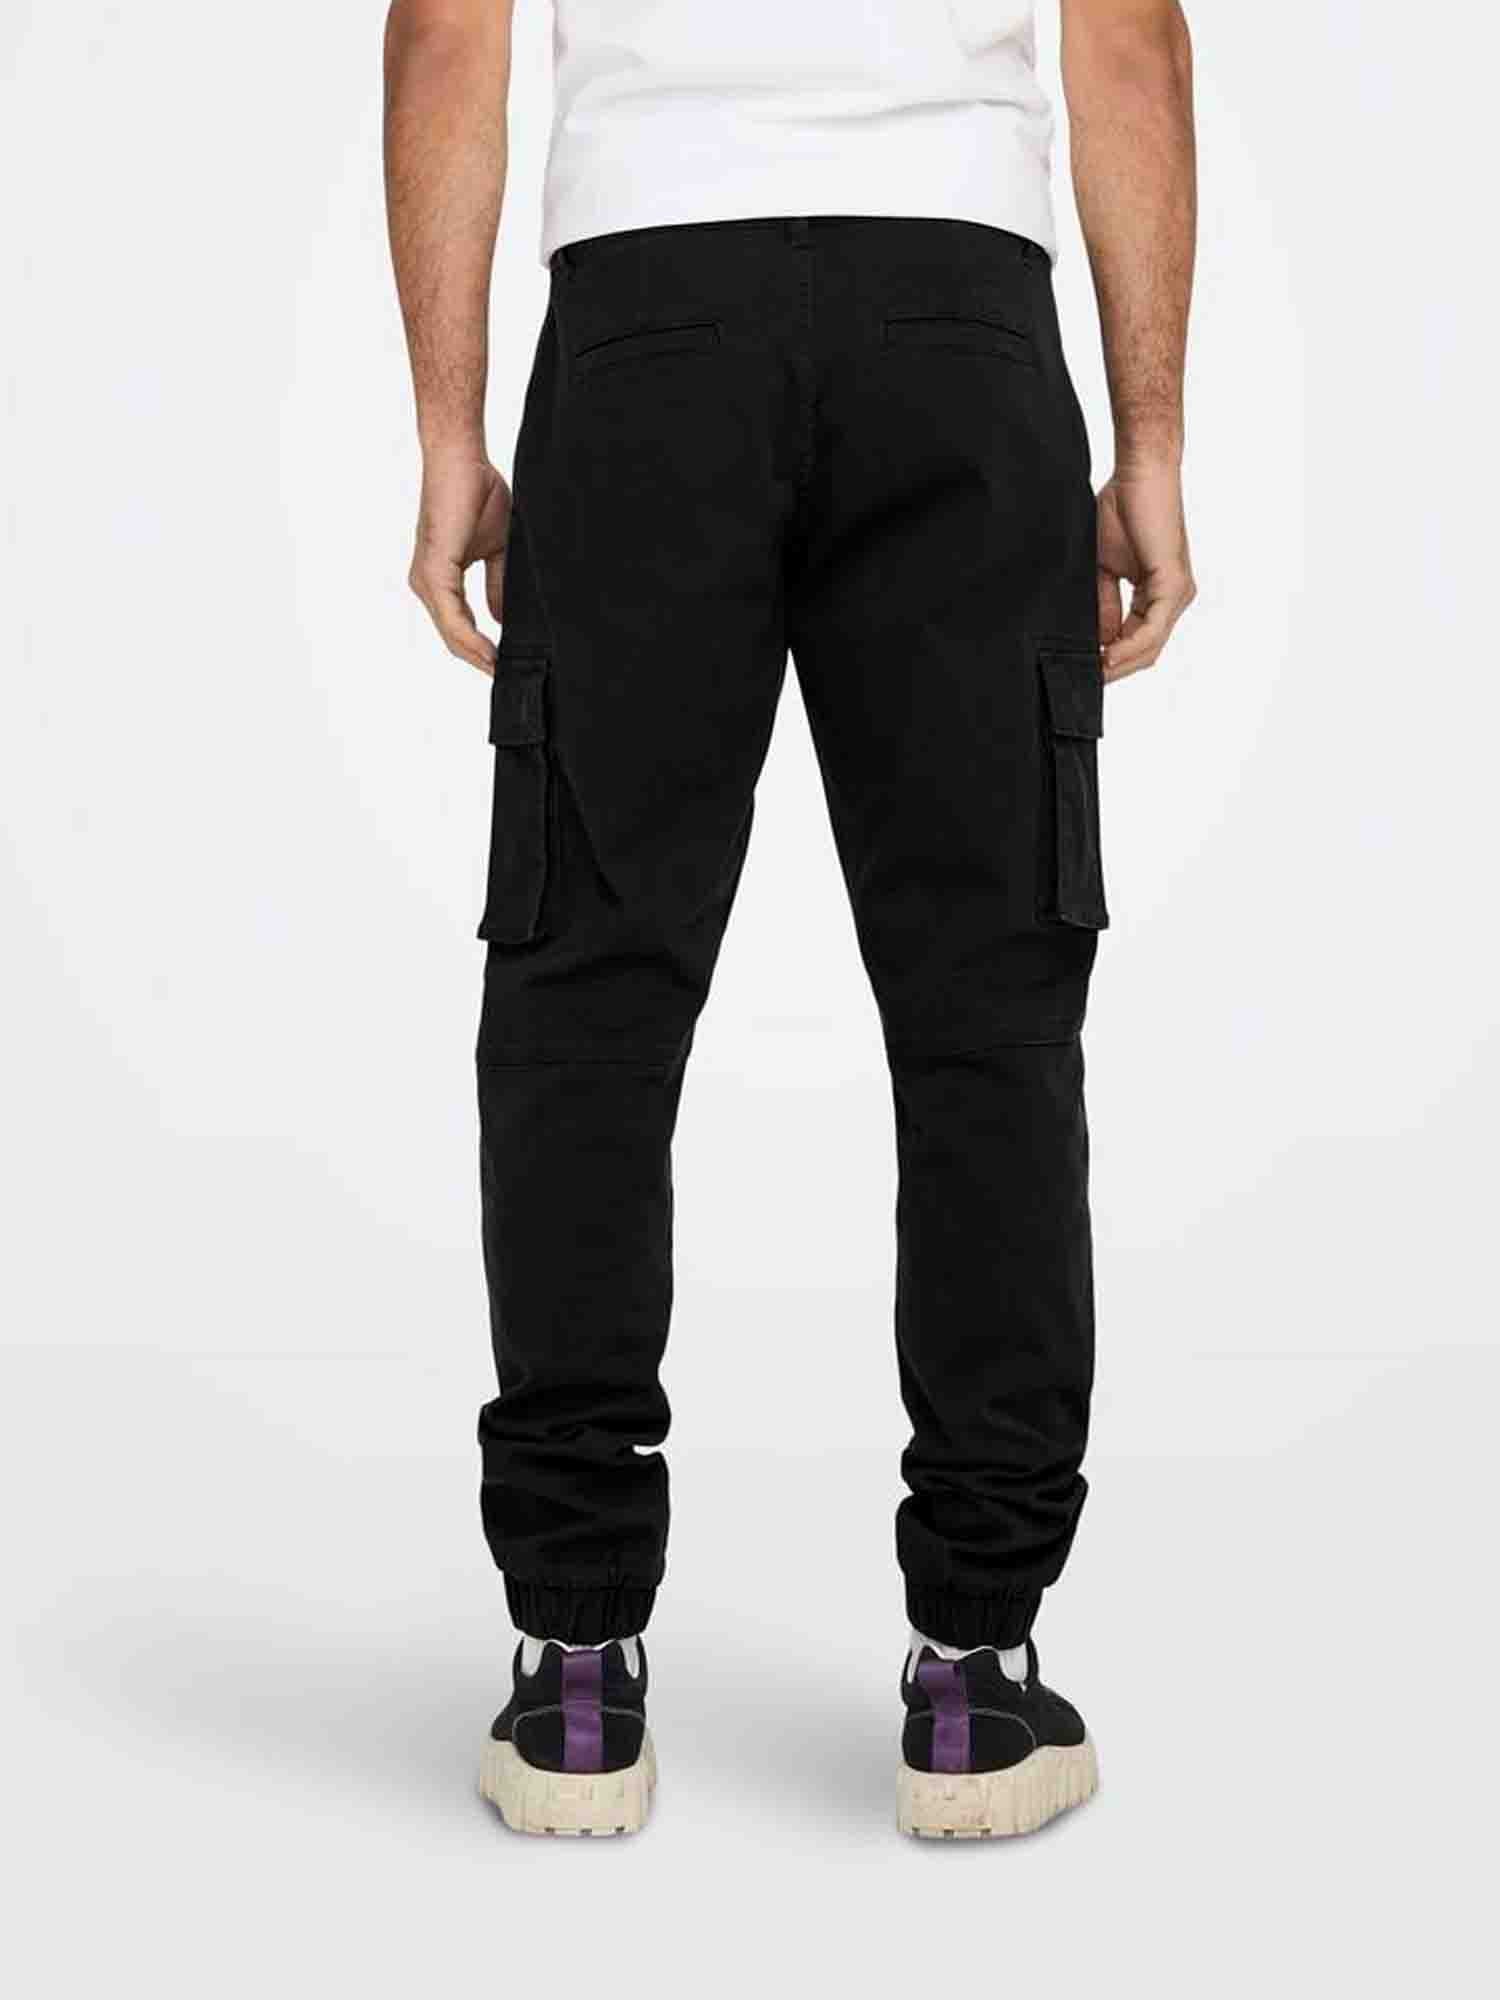 ONLY&SONS CAM STAGE PANTALONE CARGO NERO